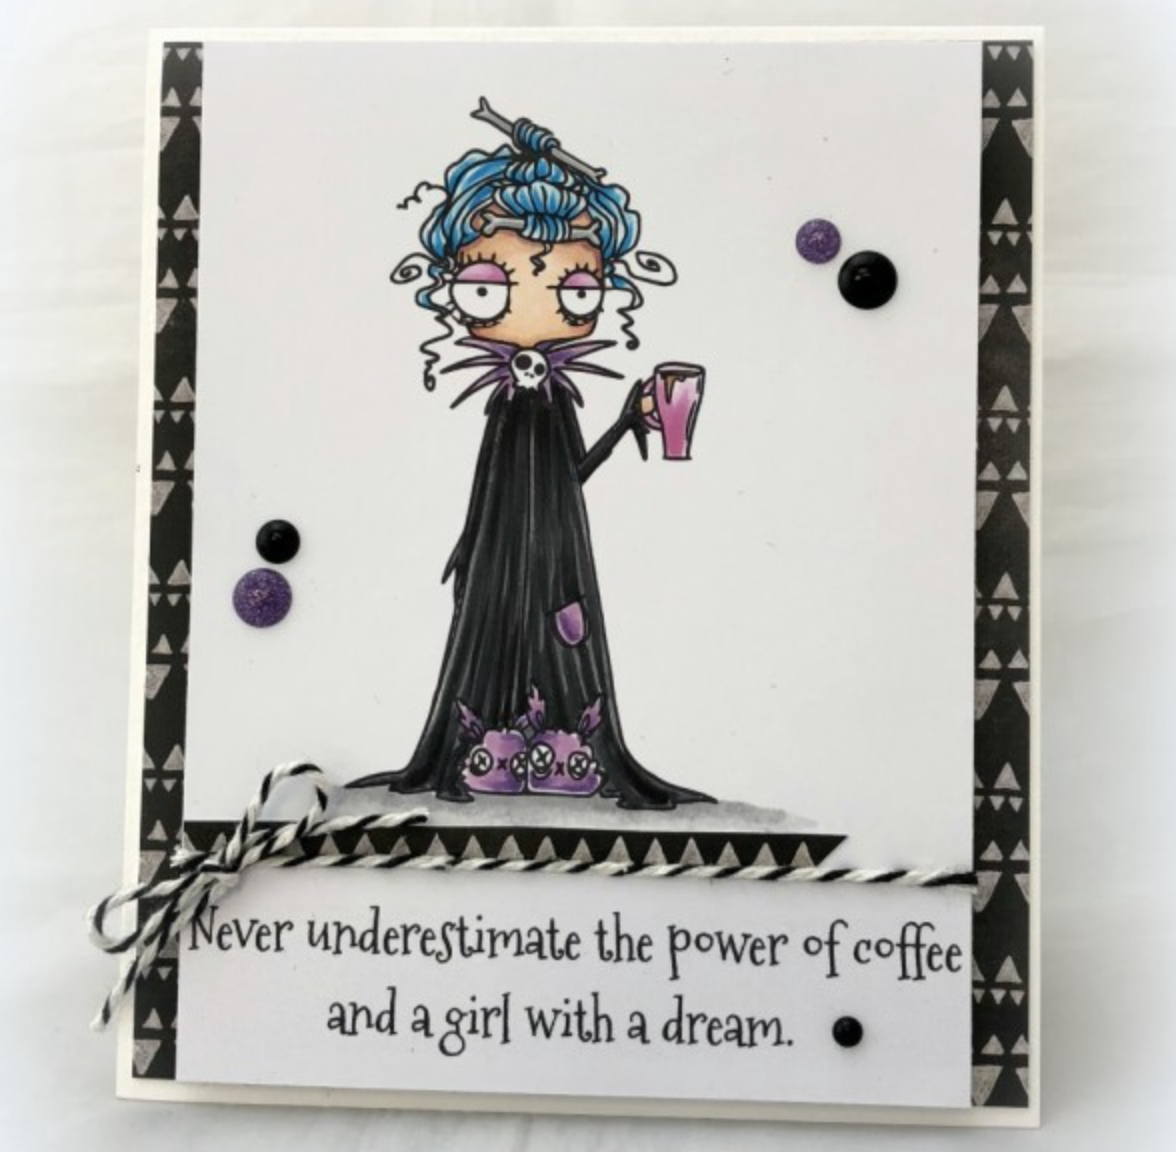 Oddball with a Coffee - Rubber Stamp - Stamping Bella